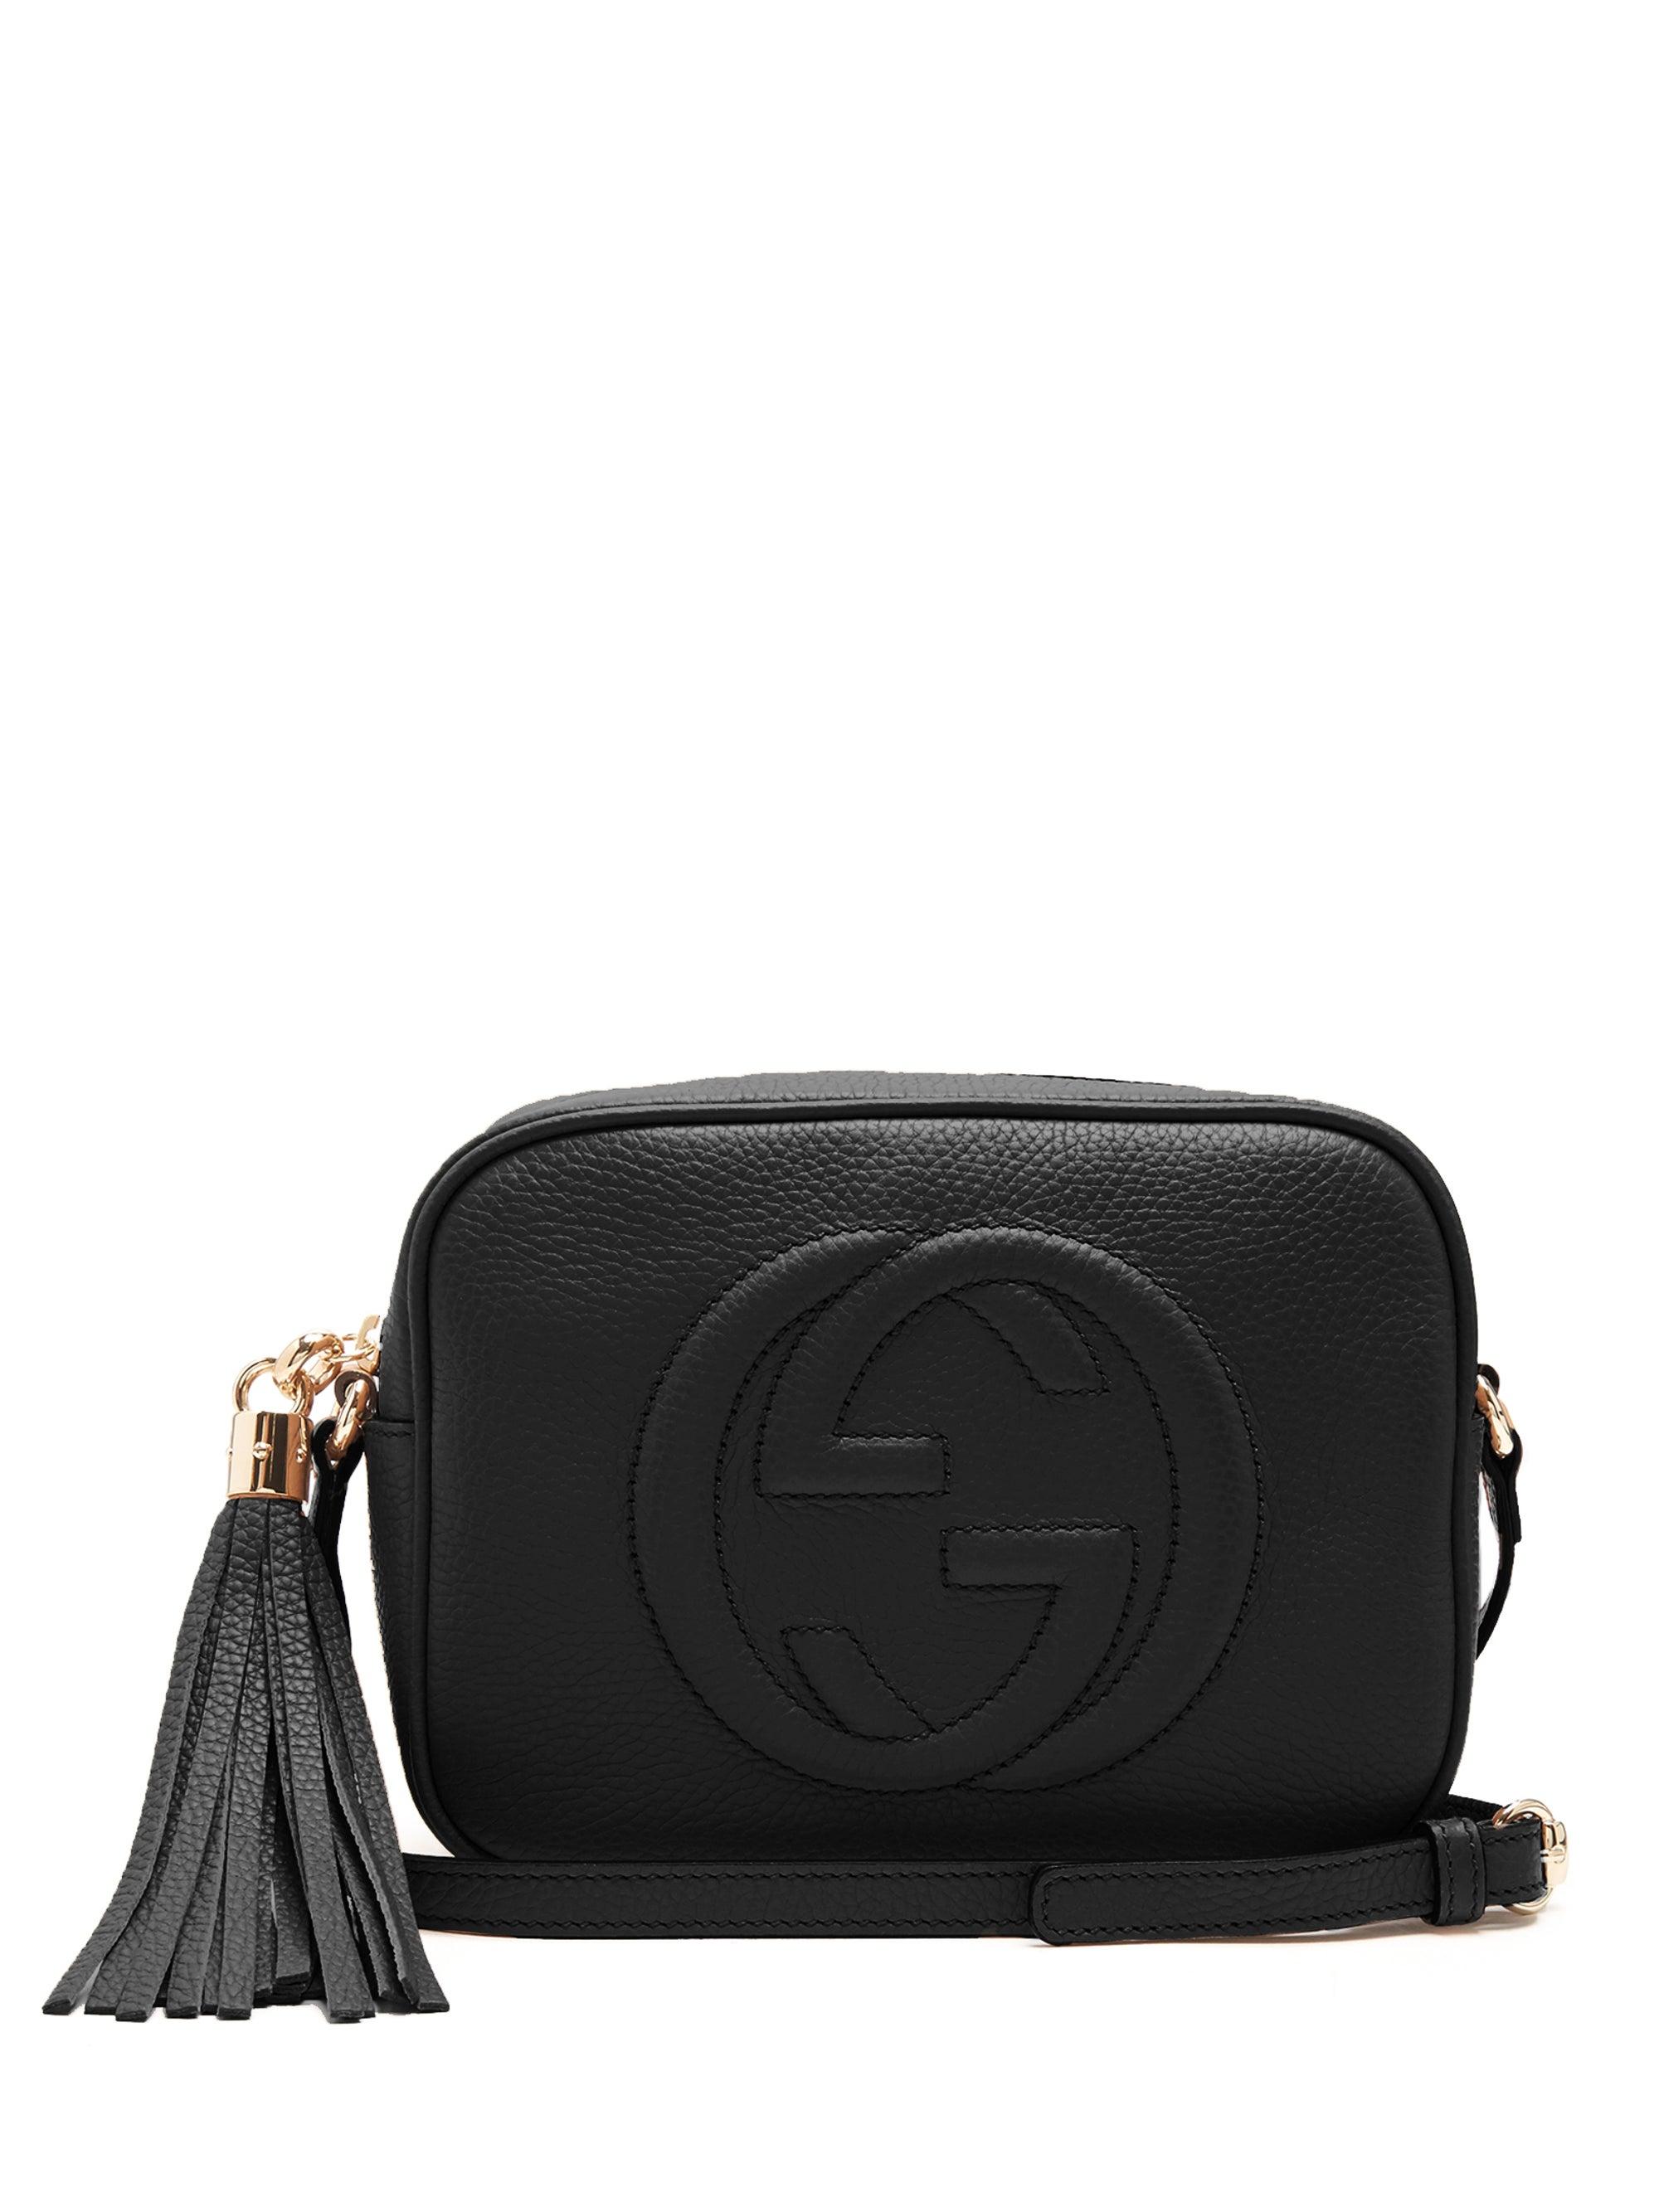 Gucci Soho Small Leather Disco Bag in Black Leather (Black) - Save 6% - Lyst